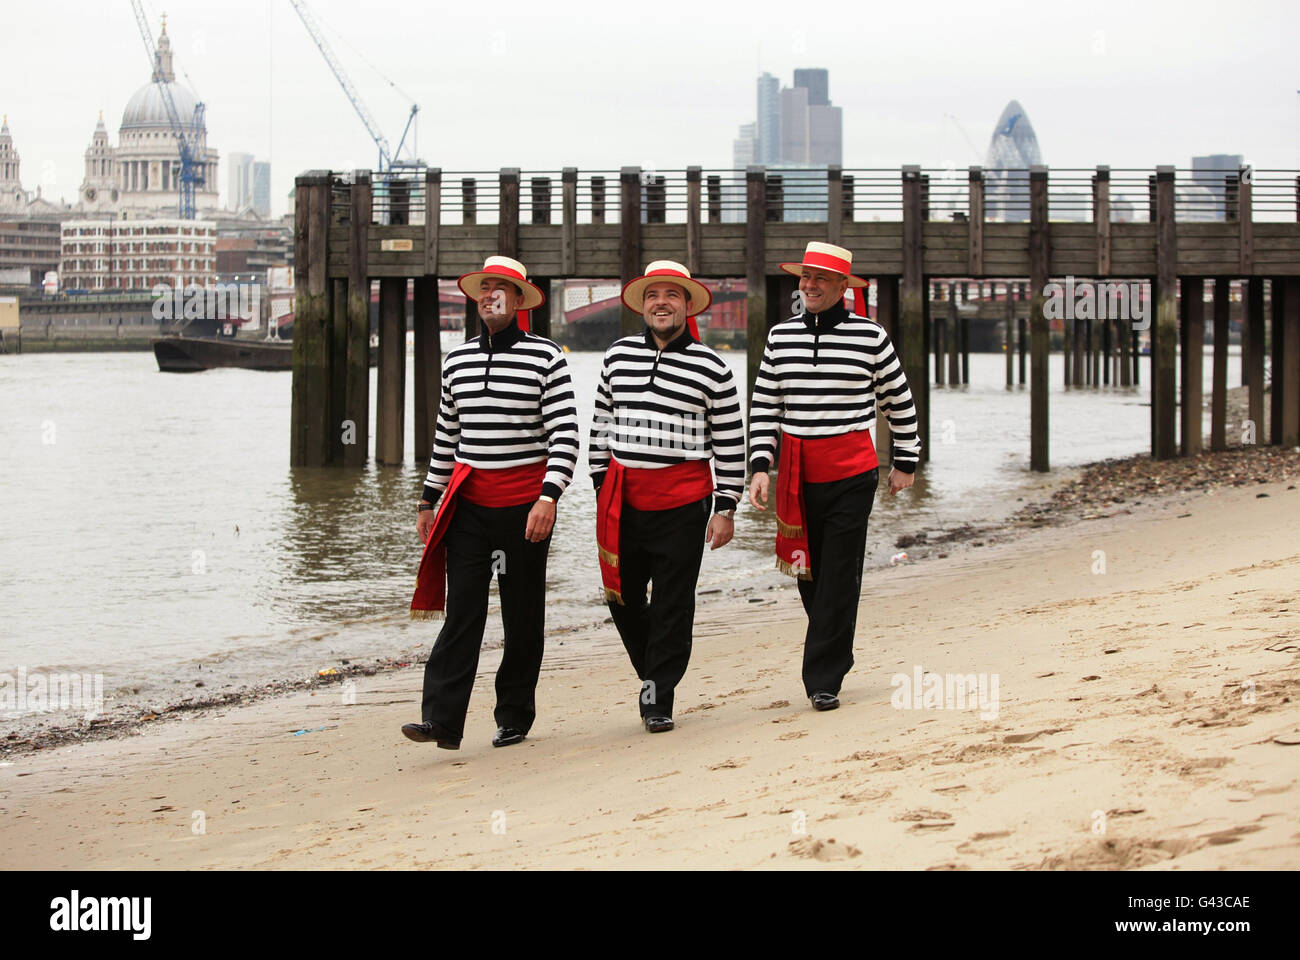 The Gondoliers (left to right) Michele Bozzato, Michael Malvich and Luca Foffano during a photocall as they sign a record deal with Universal Music - which will raise money and awareness for Venice in Peril, the fund working to save the Italian sinking city - on the South Bank in London. Stock Photo